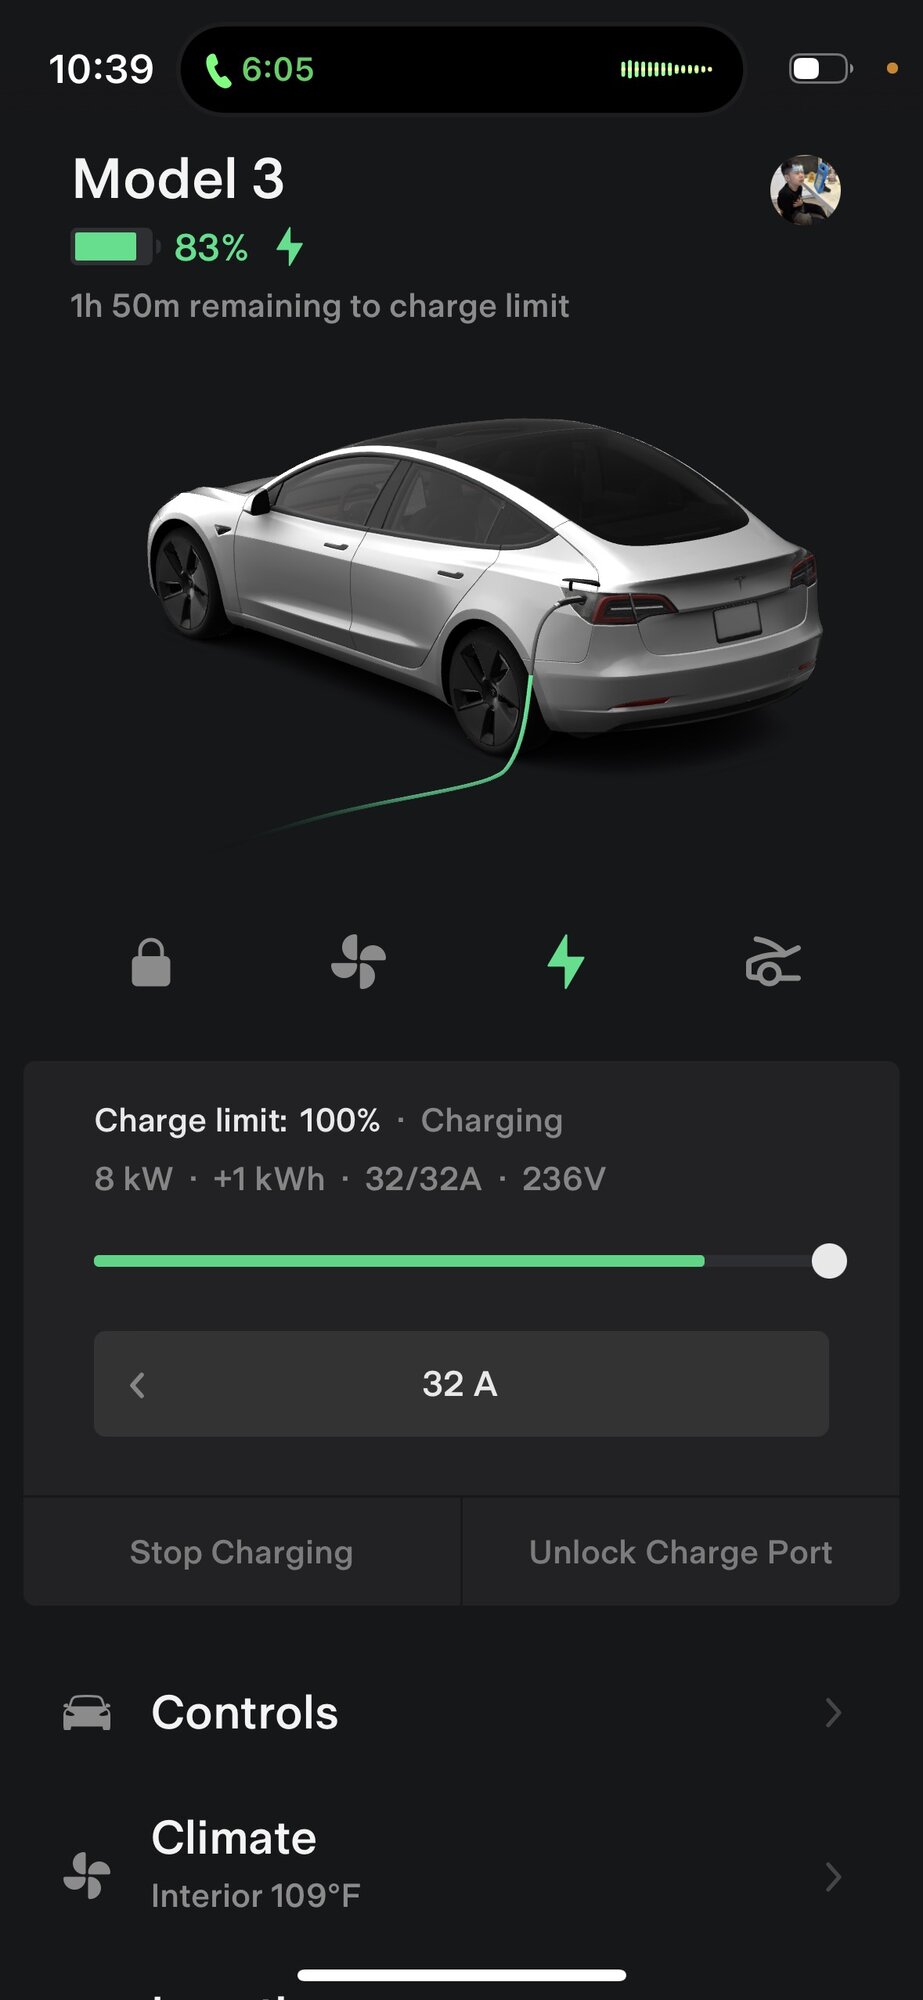 What is the max charging speed for Model 3?